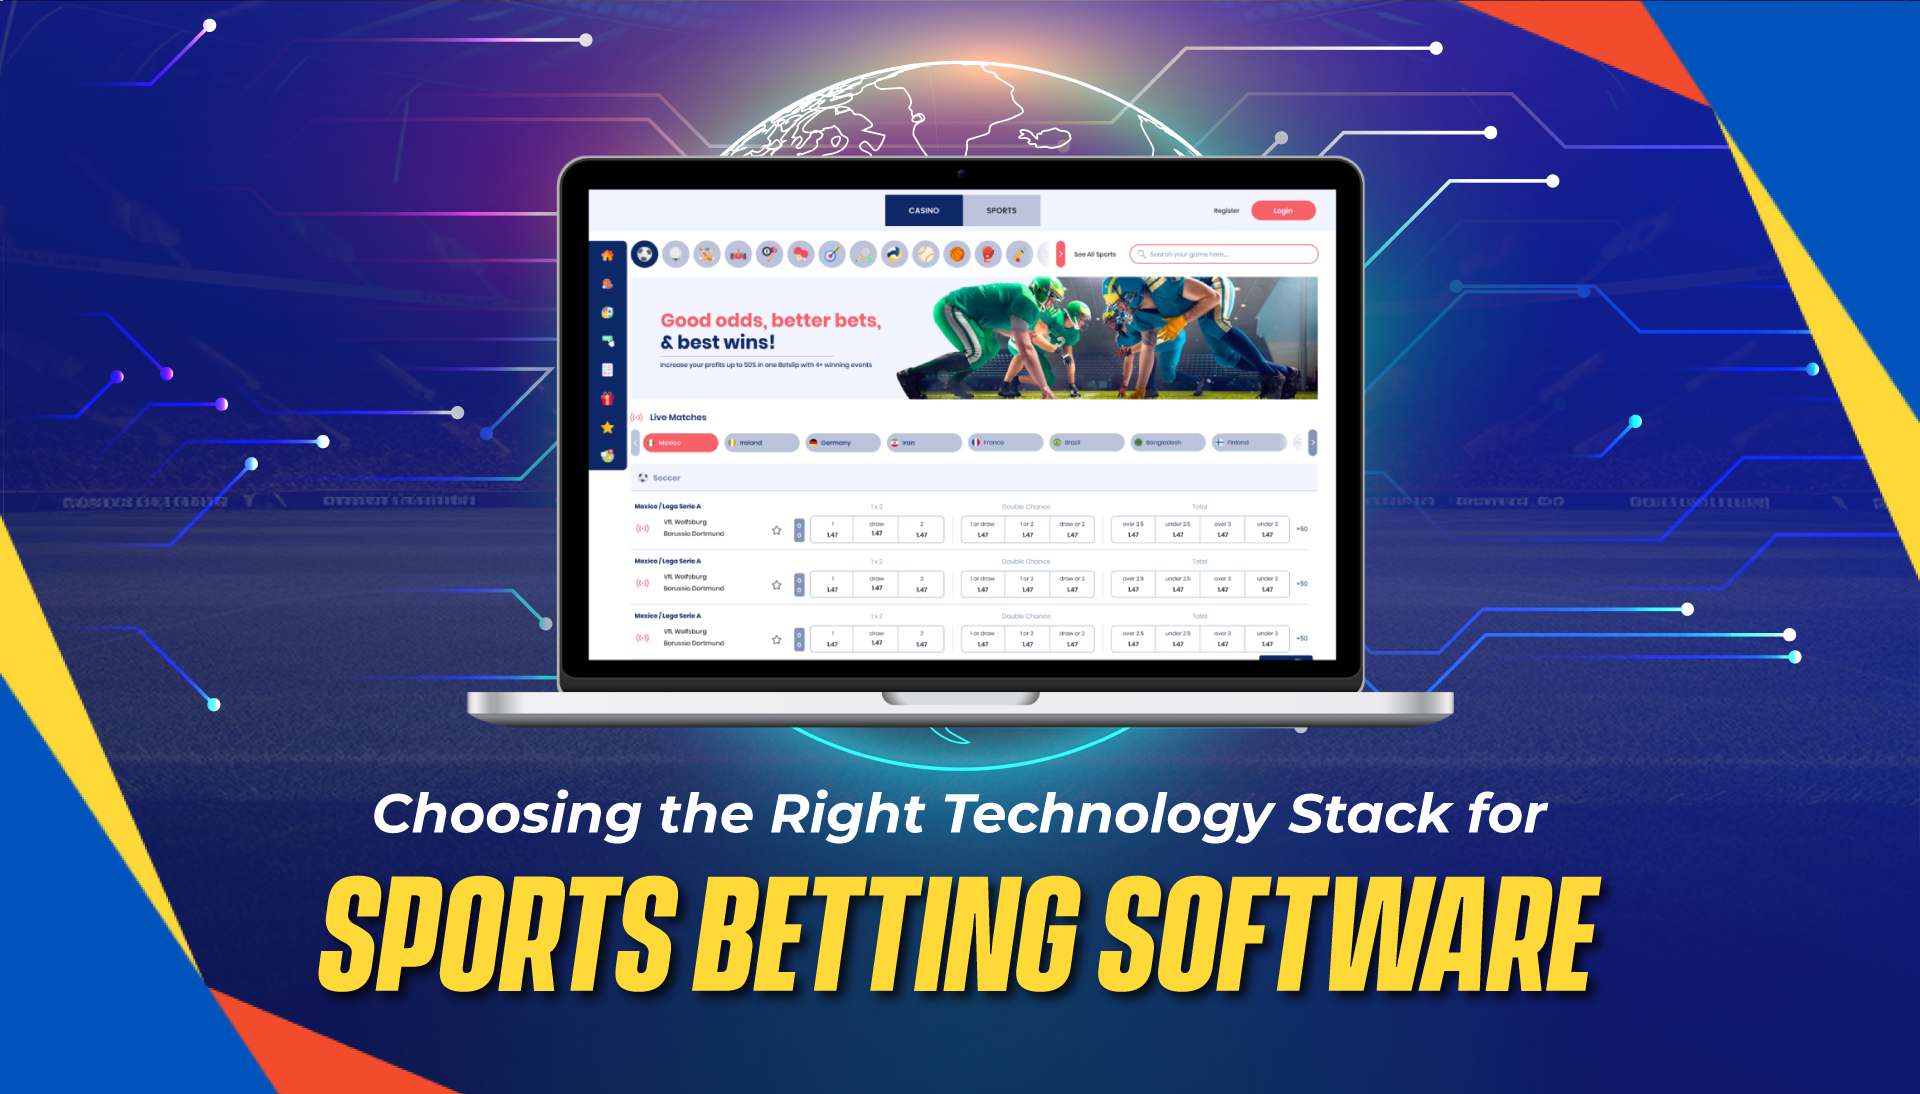 Choosing the Right Technology Stack for Sports Betting Software